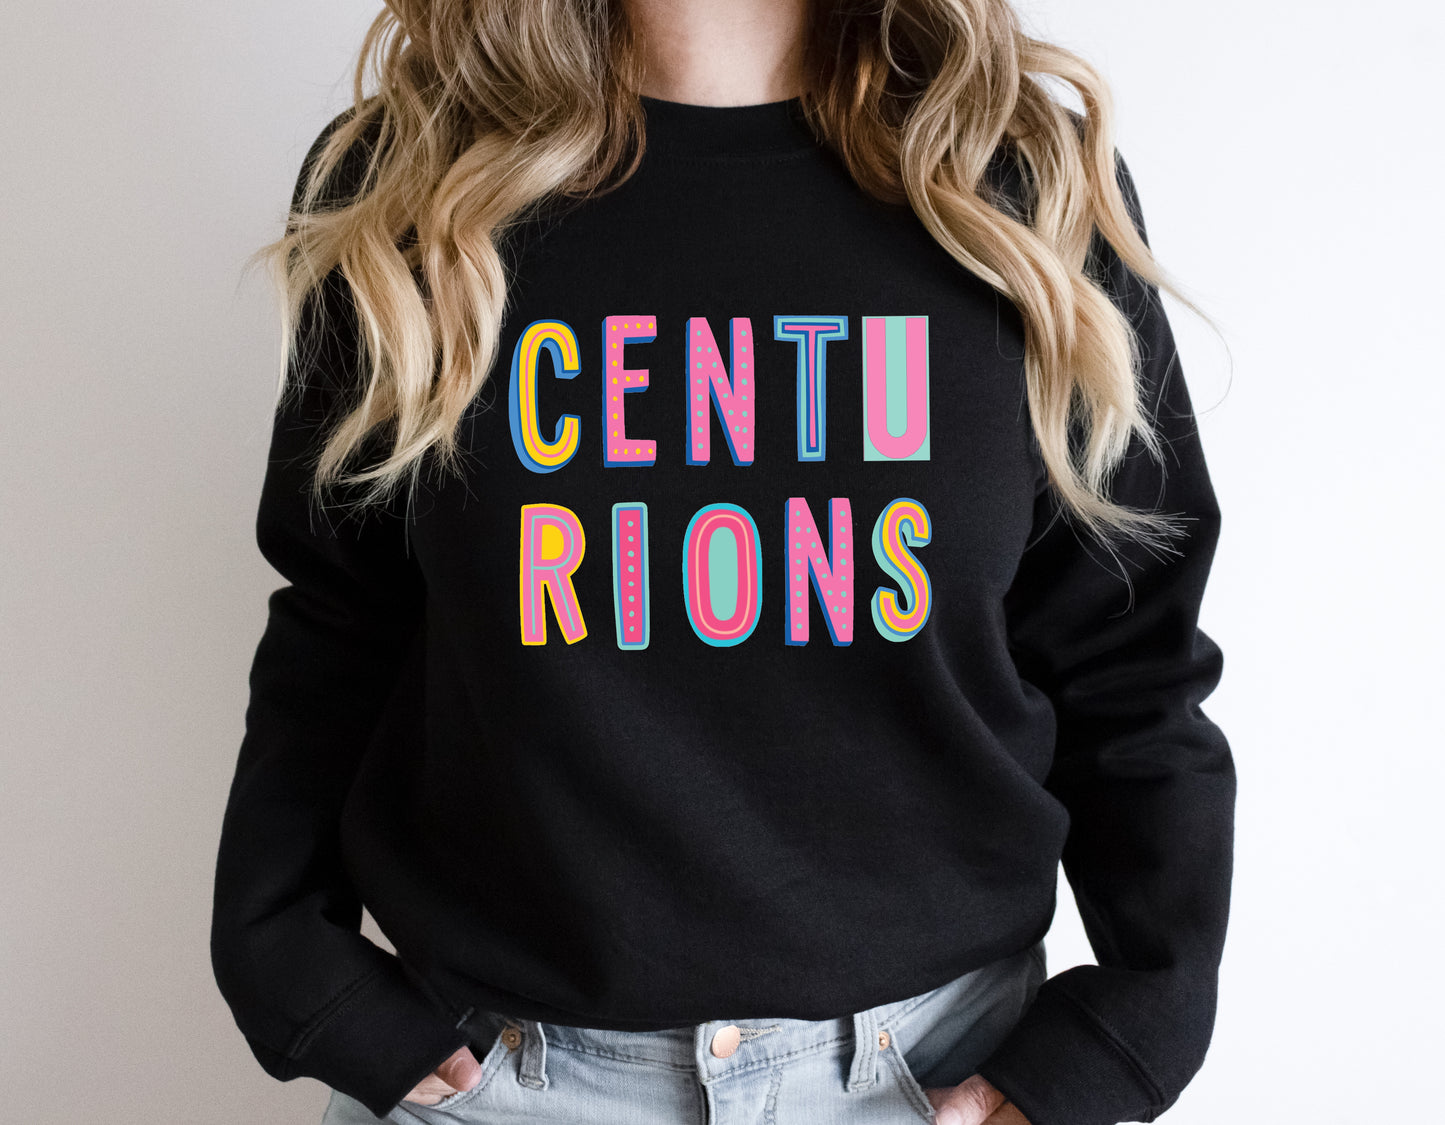 Centurions Colorful Graphic Tee